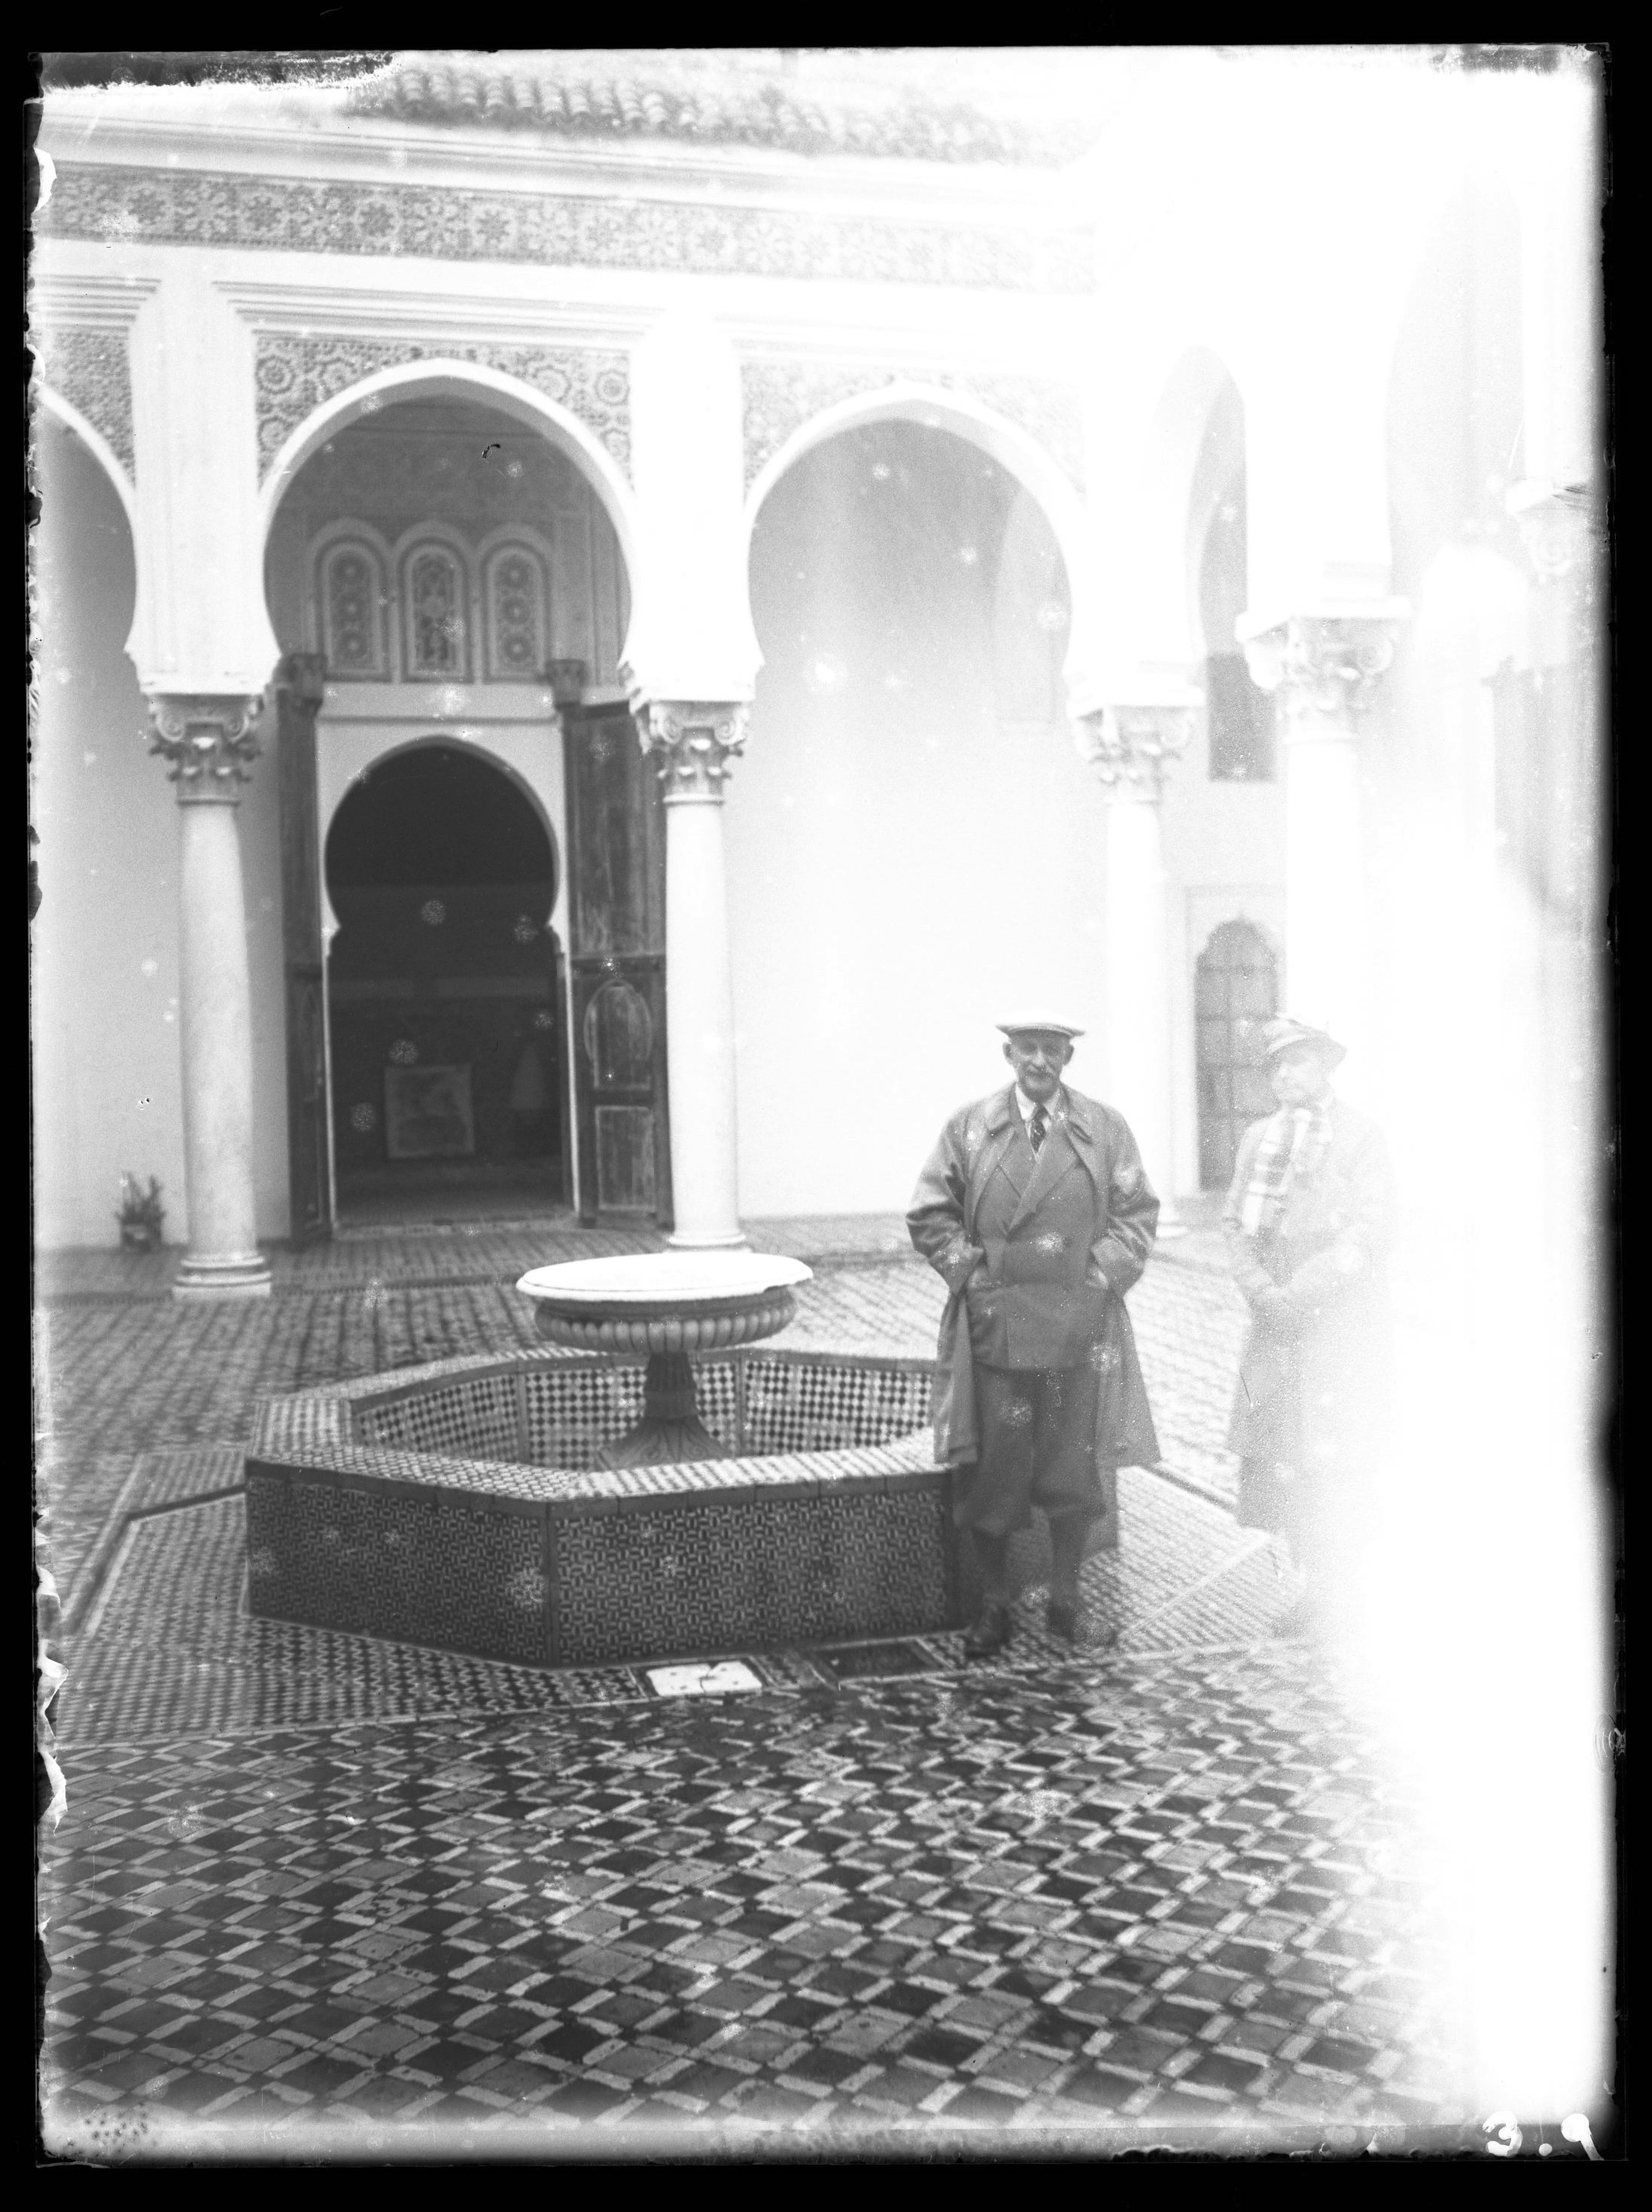 <p>Man and Woman in European dress pose next to a fountain in the courtyard.</p>